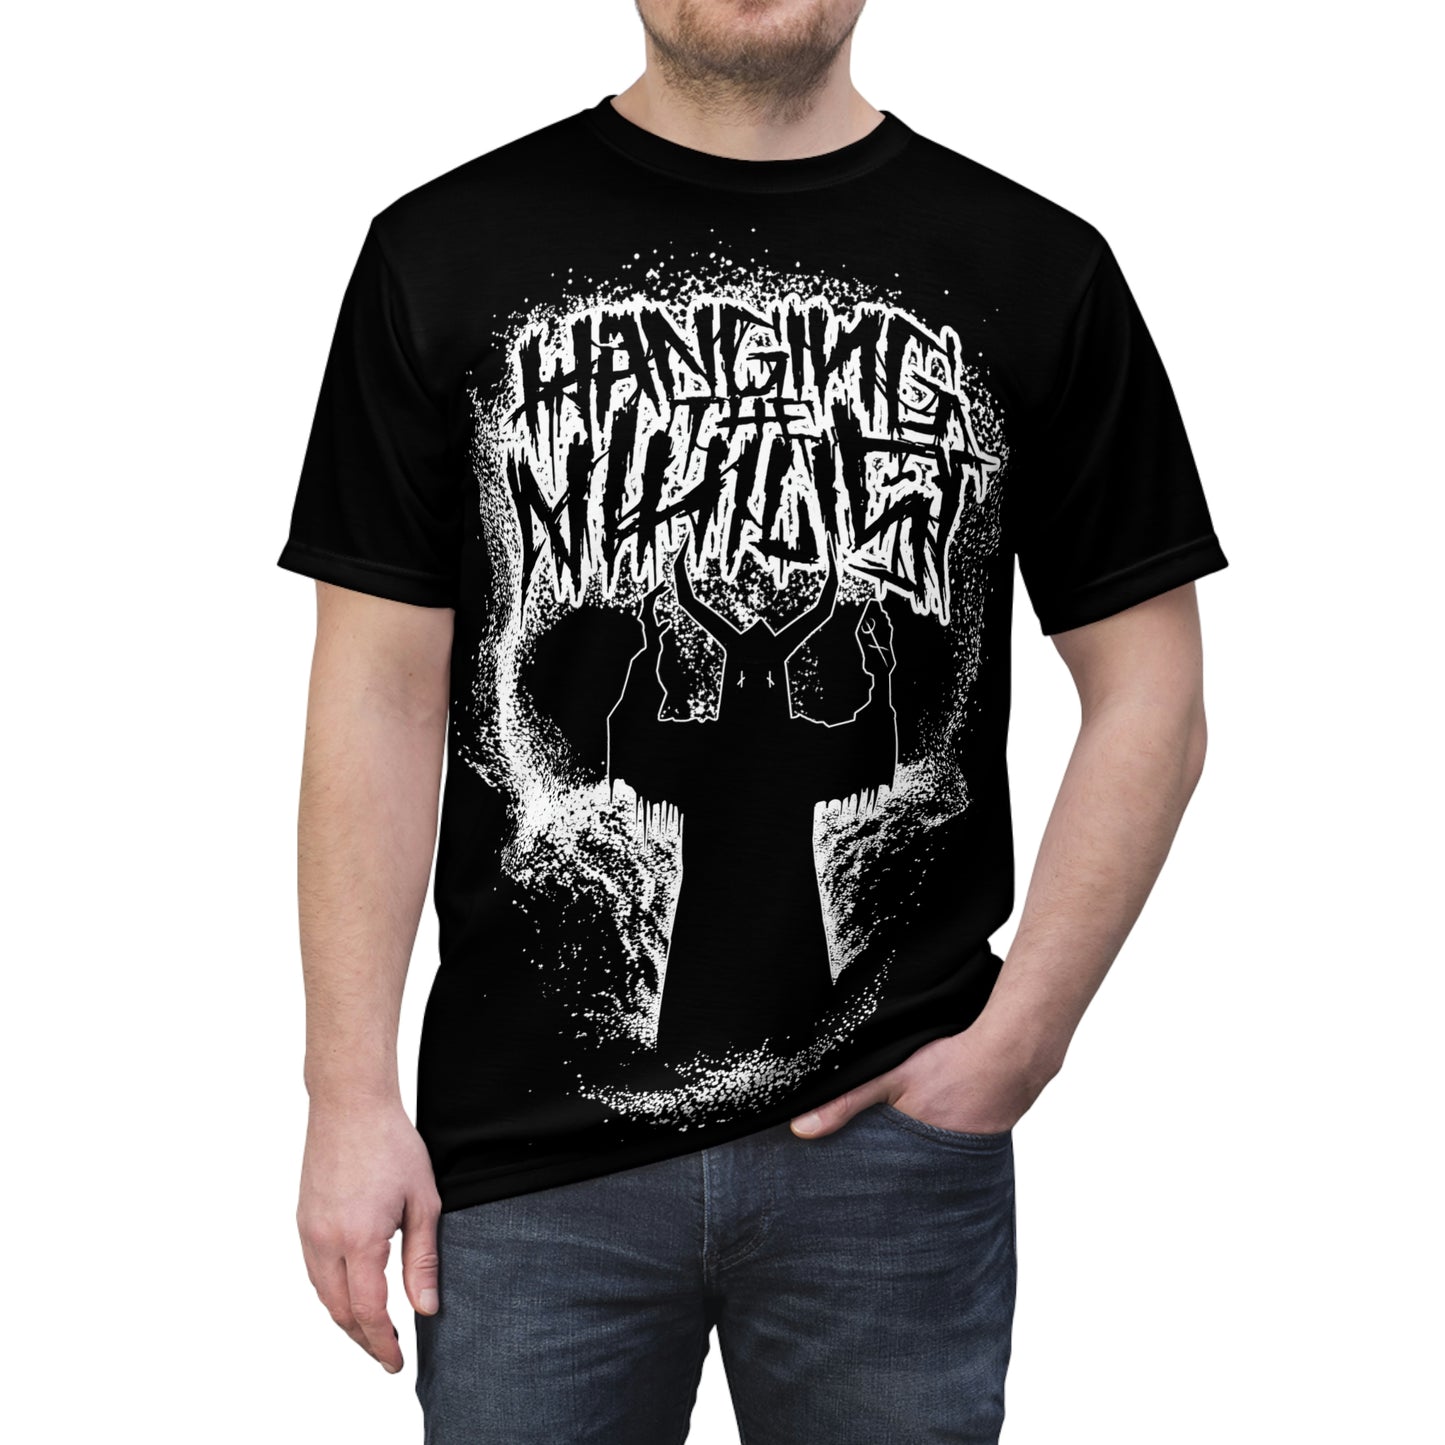 Hanging The Nihilist The Viser Tee